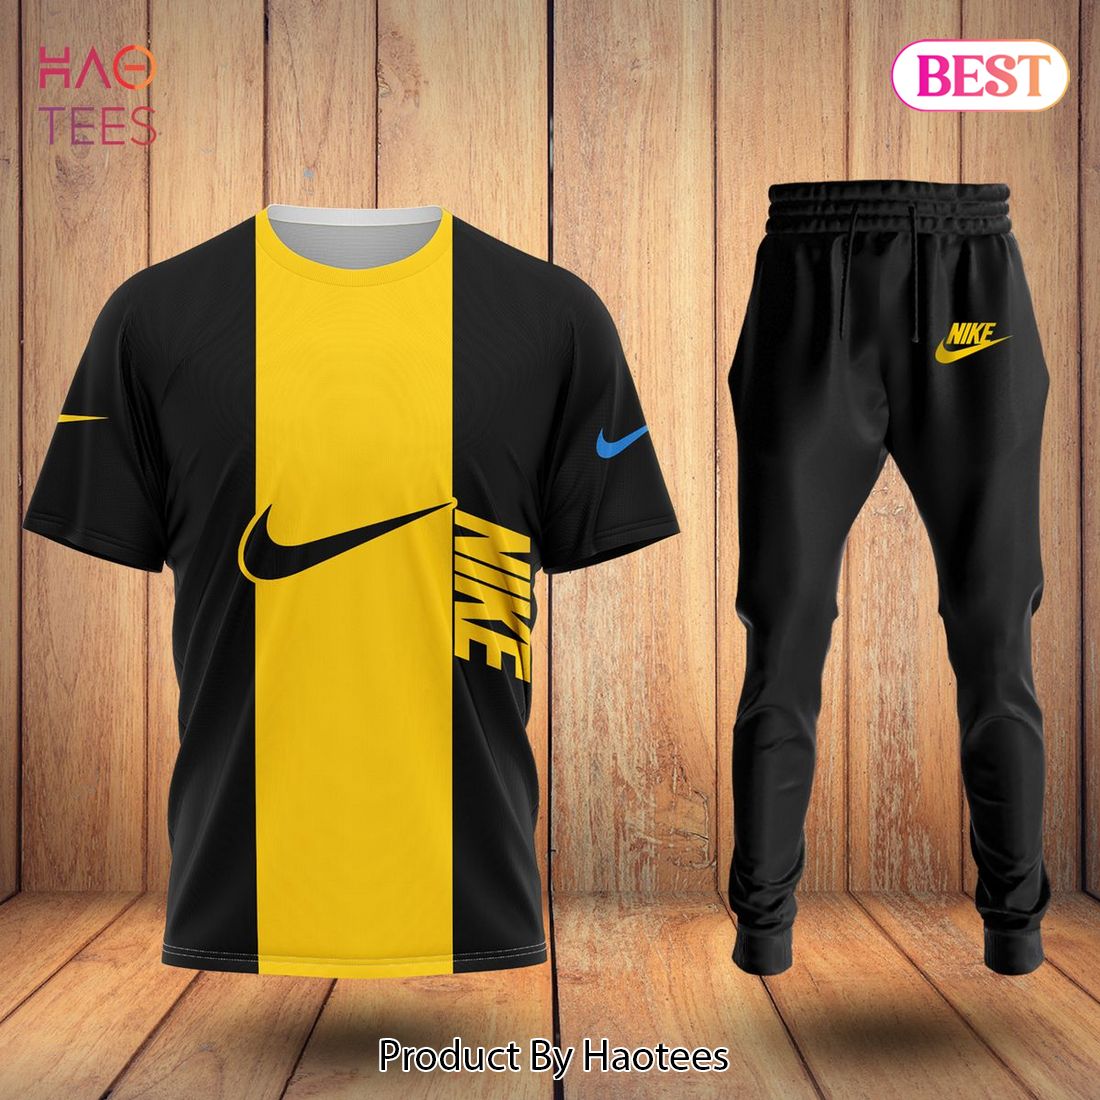 THE BEST Nike Luxury Brand Black Mix Gold T-Shirt And Pants Limited Edition